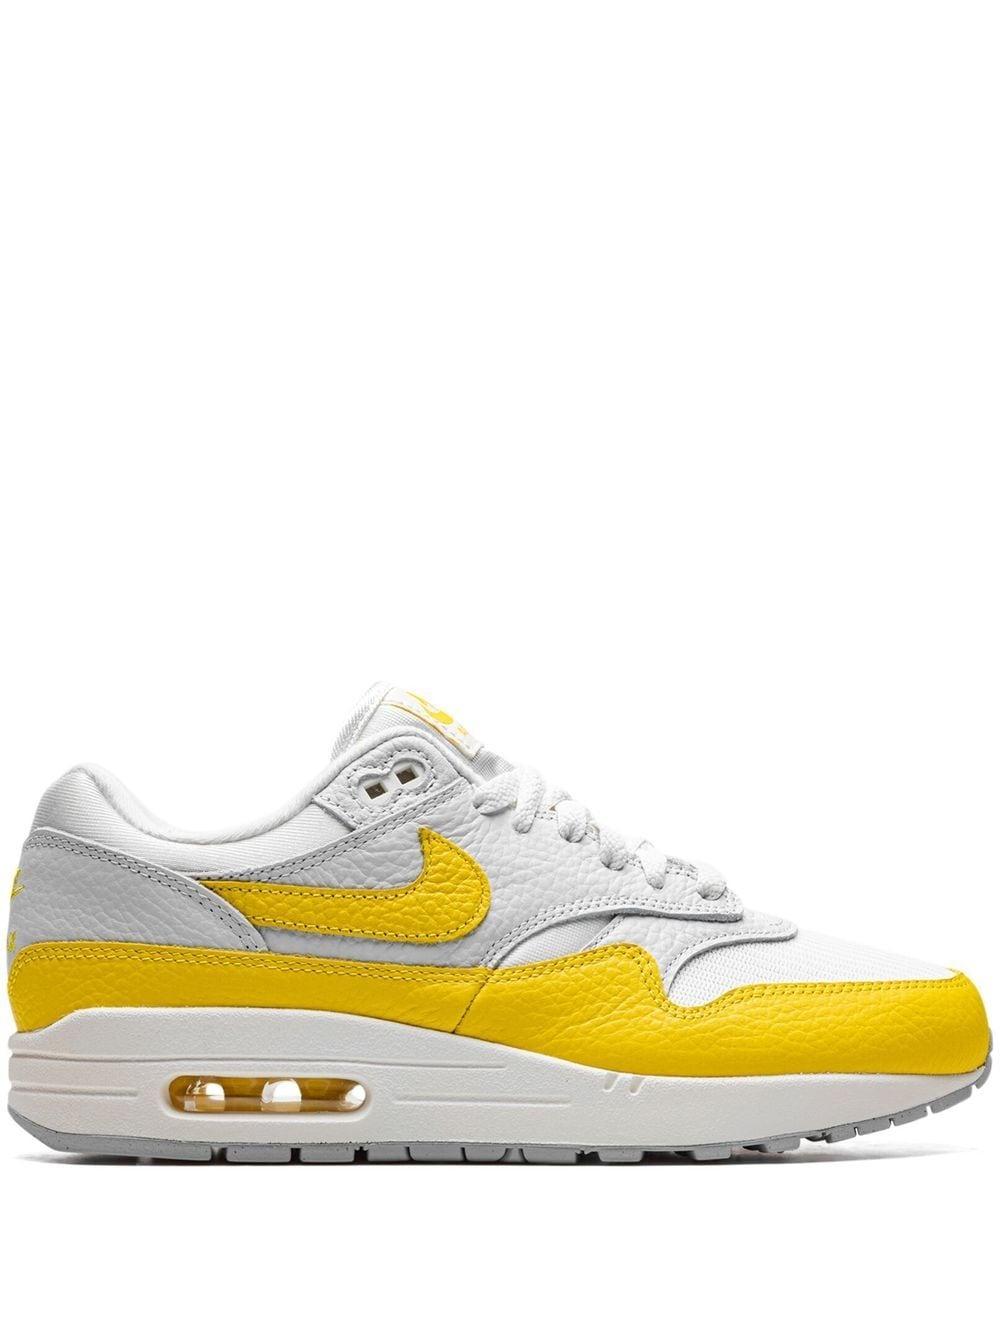 Nike Air Max 1 Shoes in White | Lyst